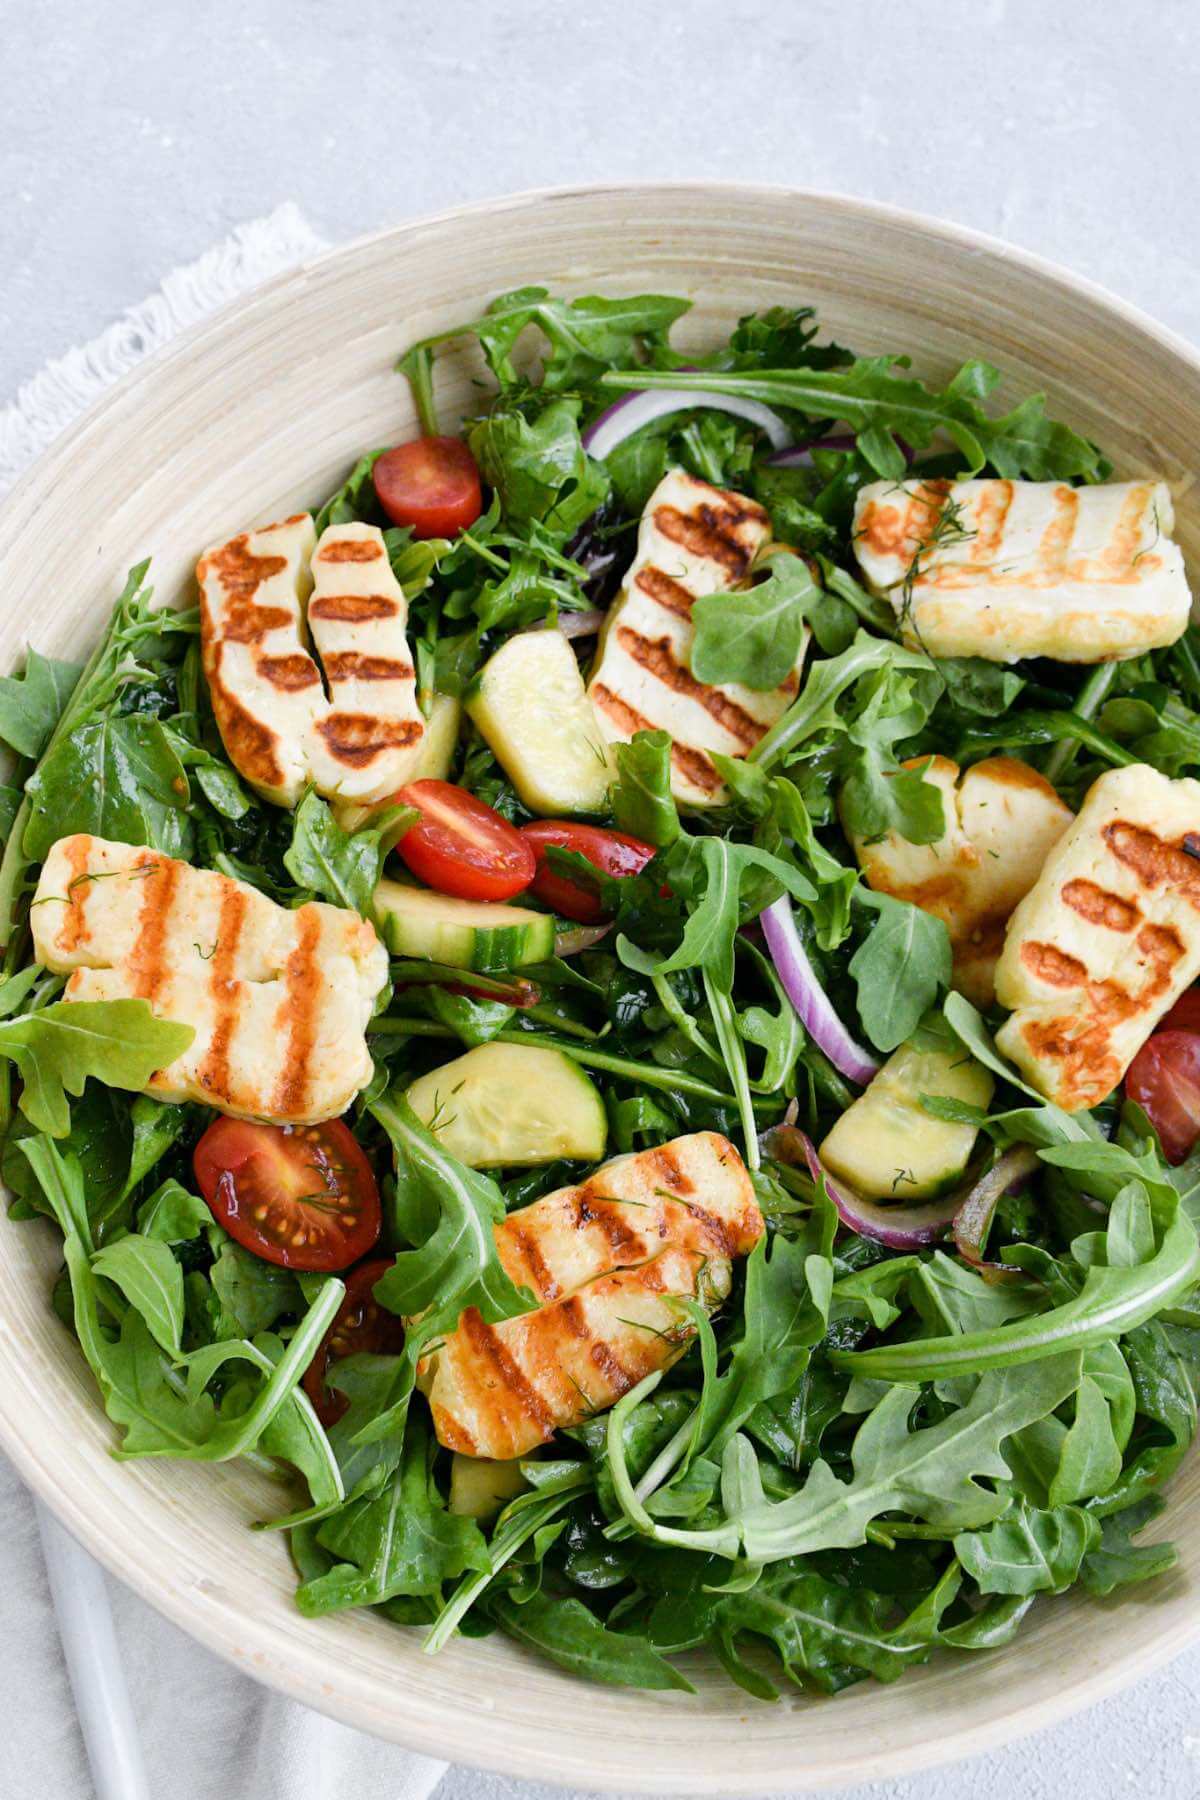 Halloumi cheese salad with spring mix, arugula, cherry tomatoes, fresh dill, sliced onions, and an olive oil and balsamic glaze dressing.